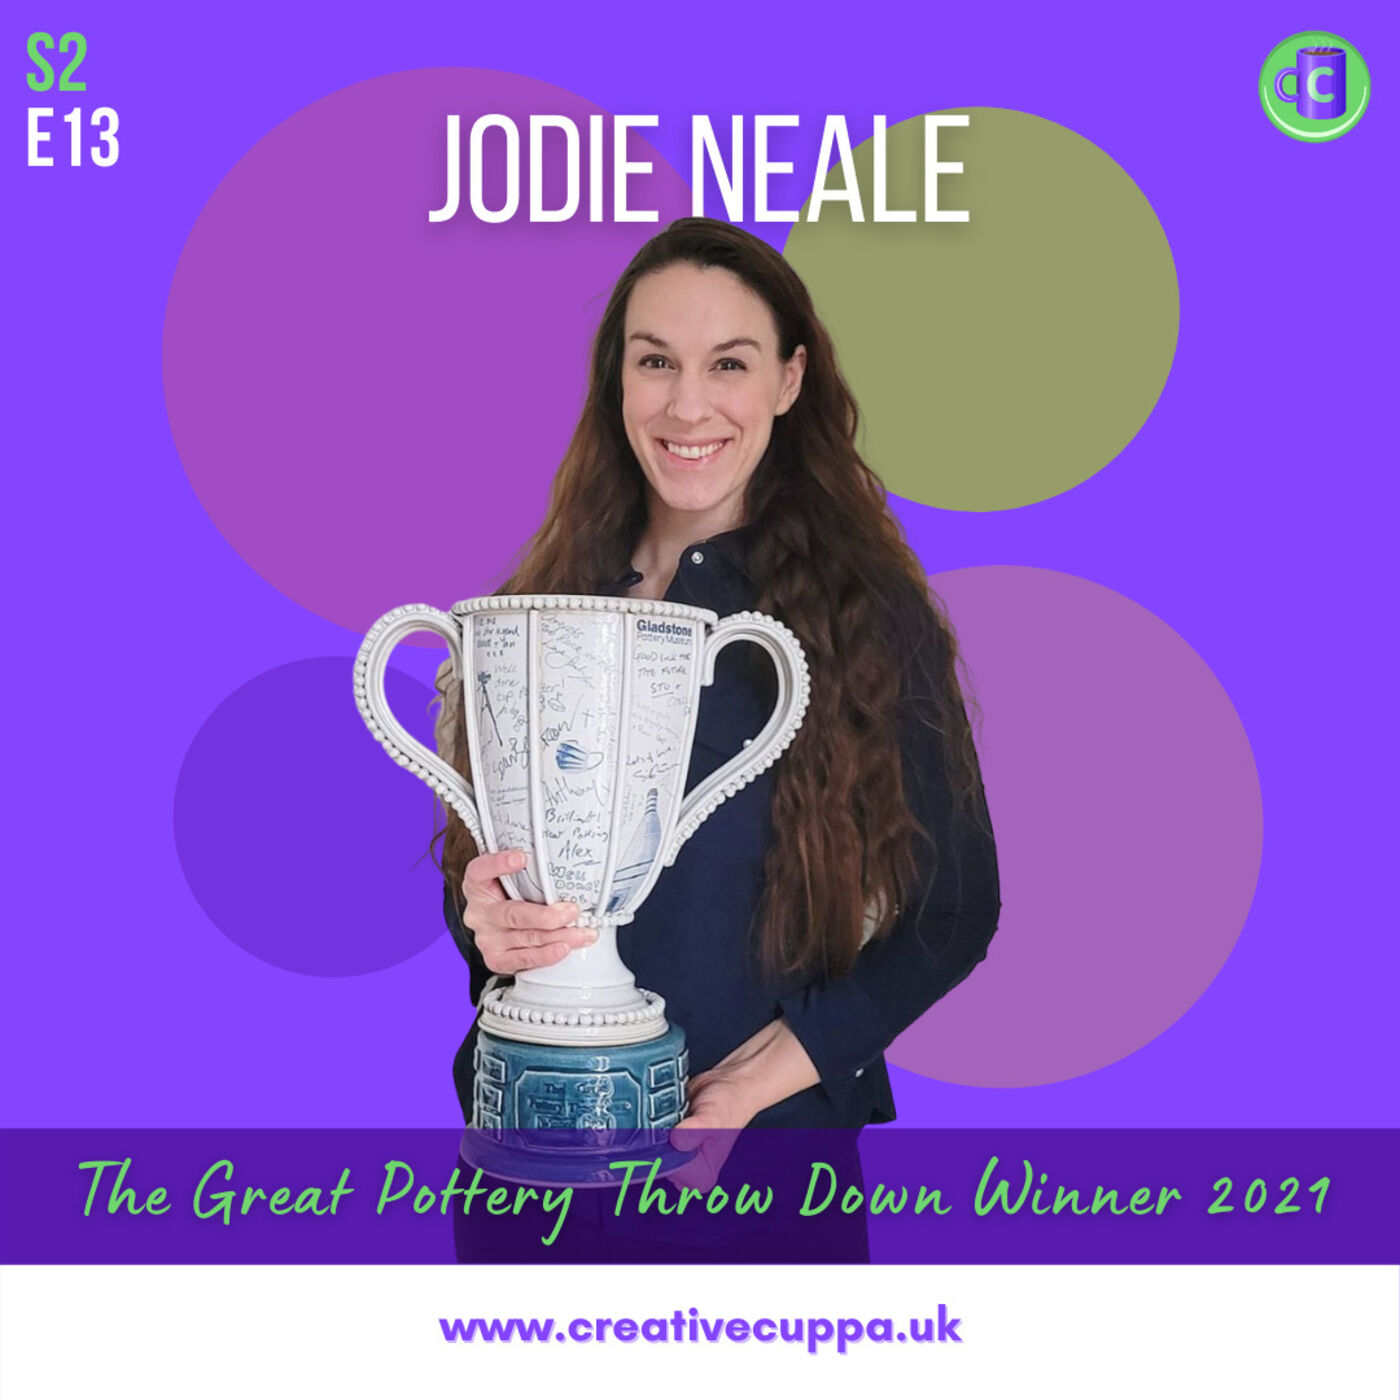 Jodie Neale: winner of The Great Pottery Throw Down 2021